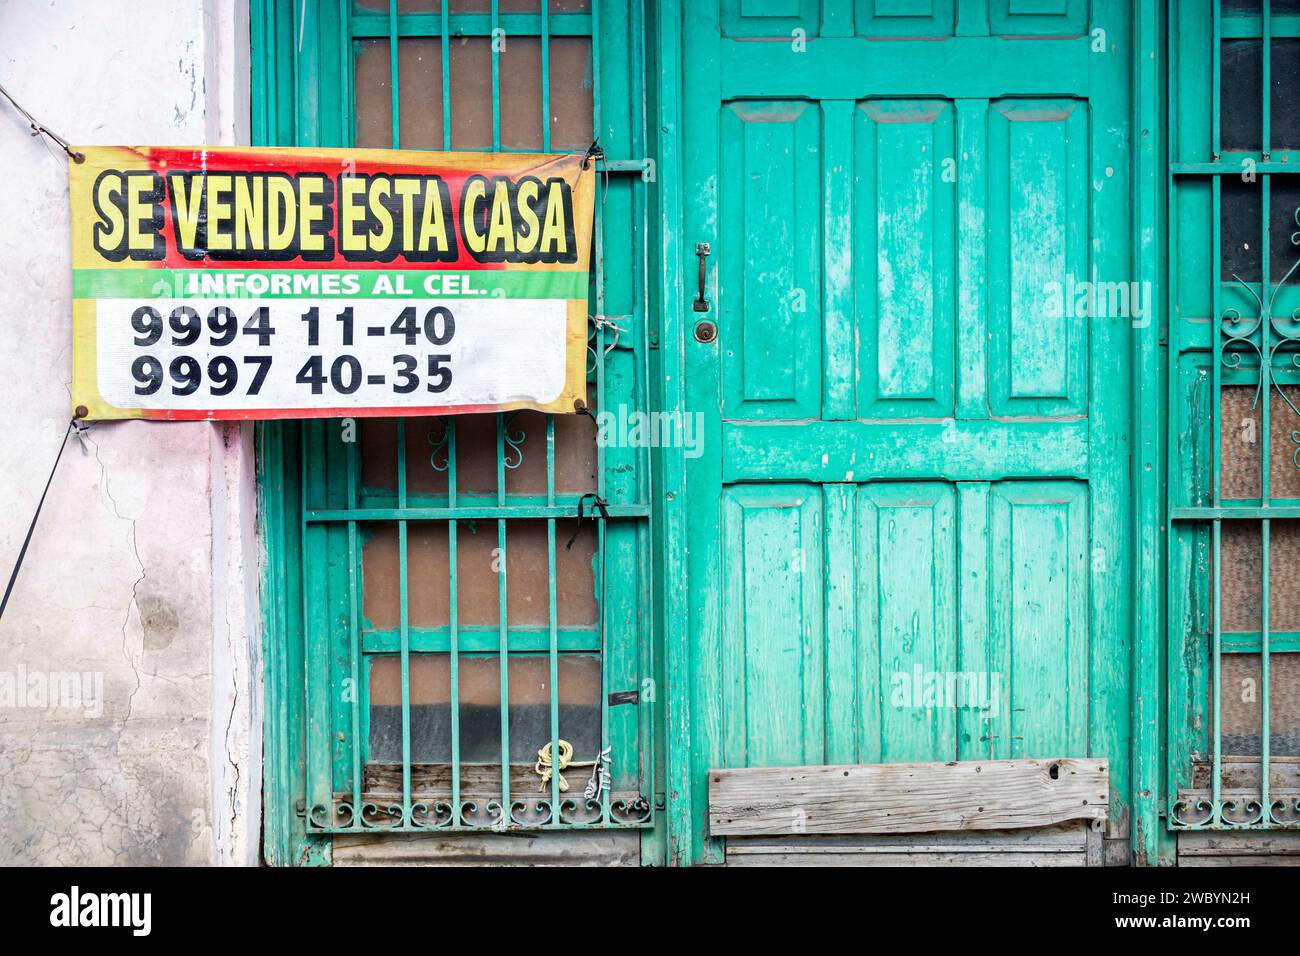 Merida Mexico,centro historico central historic district,banner,this house for sale,real estate,sign lease leasing,rent renting,sale,commercial,offer, Stock Photo